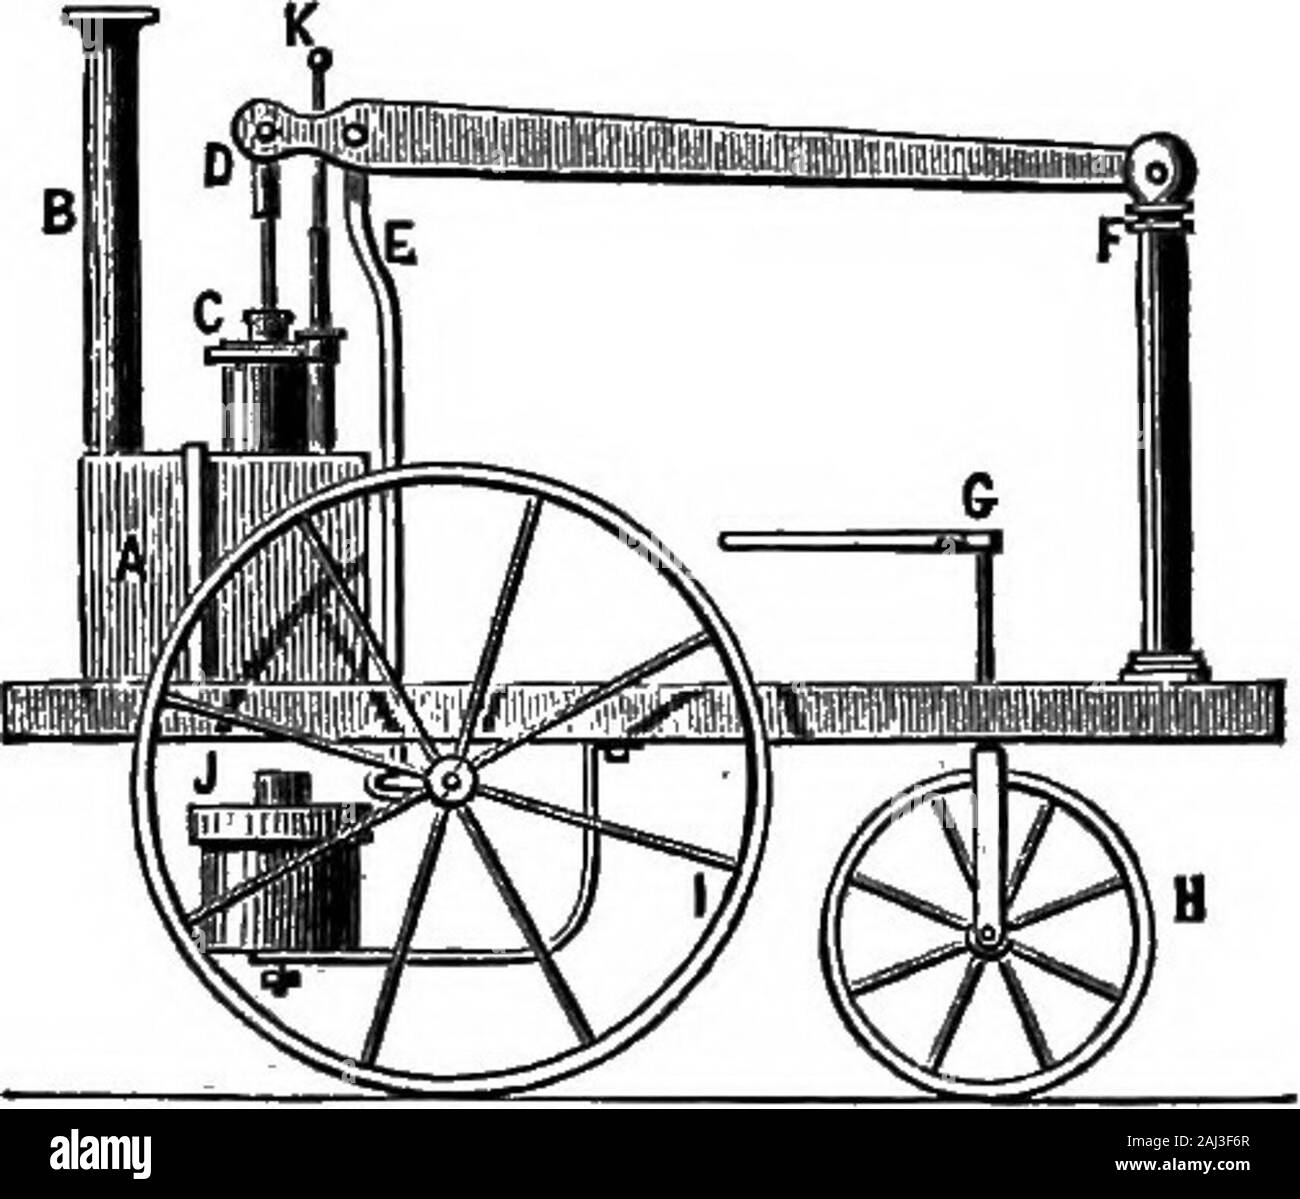 A history of the growth of the steam-engine . de Saxe, heconstructed his first steam locomotive-engine, which onlydisappointed him, as he stated, in consequence of the ineffi-ciency of the feed-pumps. The second was that built underthe authority of the Minister Choiseul, and cost 20,000livres. Cugnot received from the French Government apension of 600 livres. He died in 1804, at the age of sev-enty-nine years. Watt, at a very early period, proposed to apply his own STEAM-LOCOMOTION ON BAILEOADS. 153 engine to locomotion, and contemplated using either a non-condensing engine or an air-surface c Stock Photo